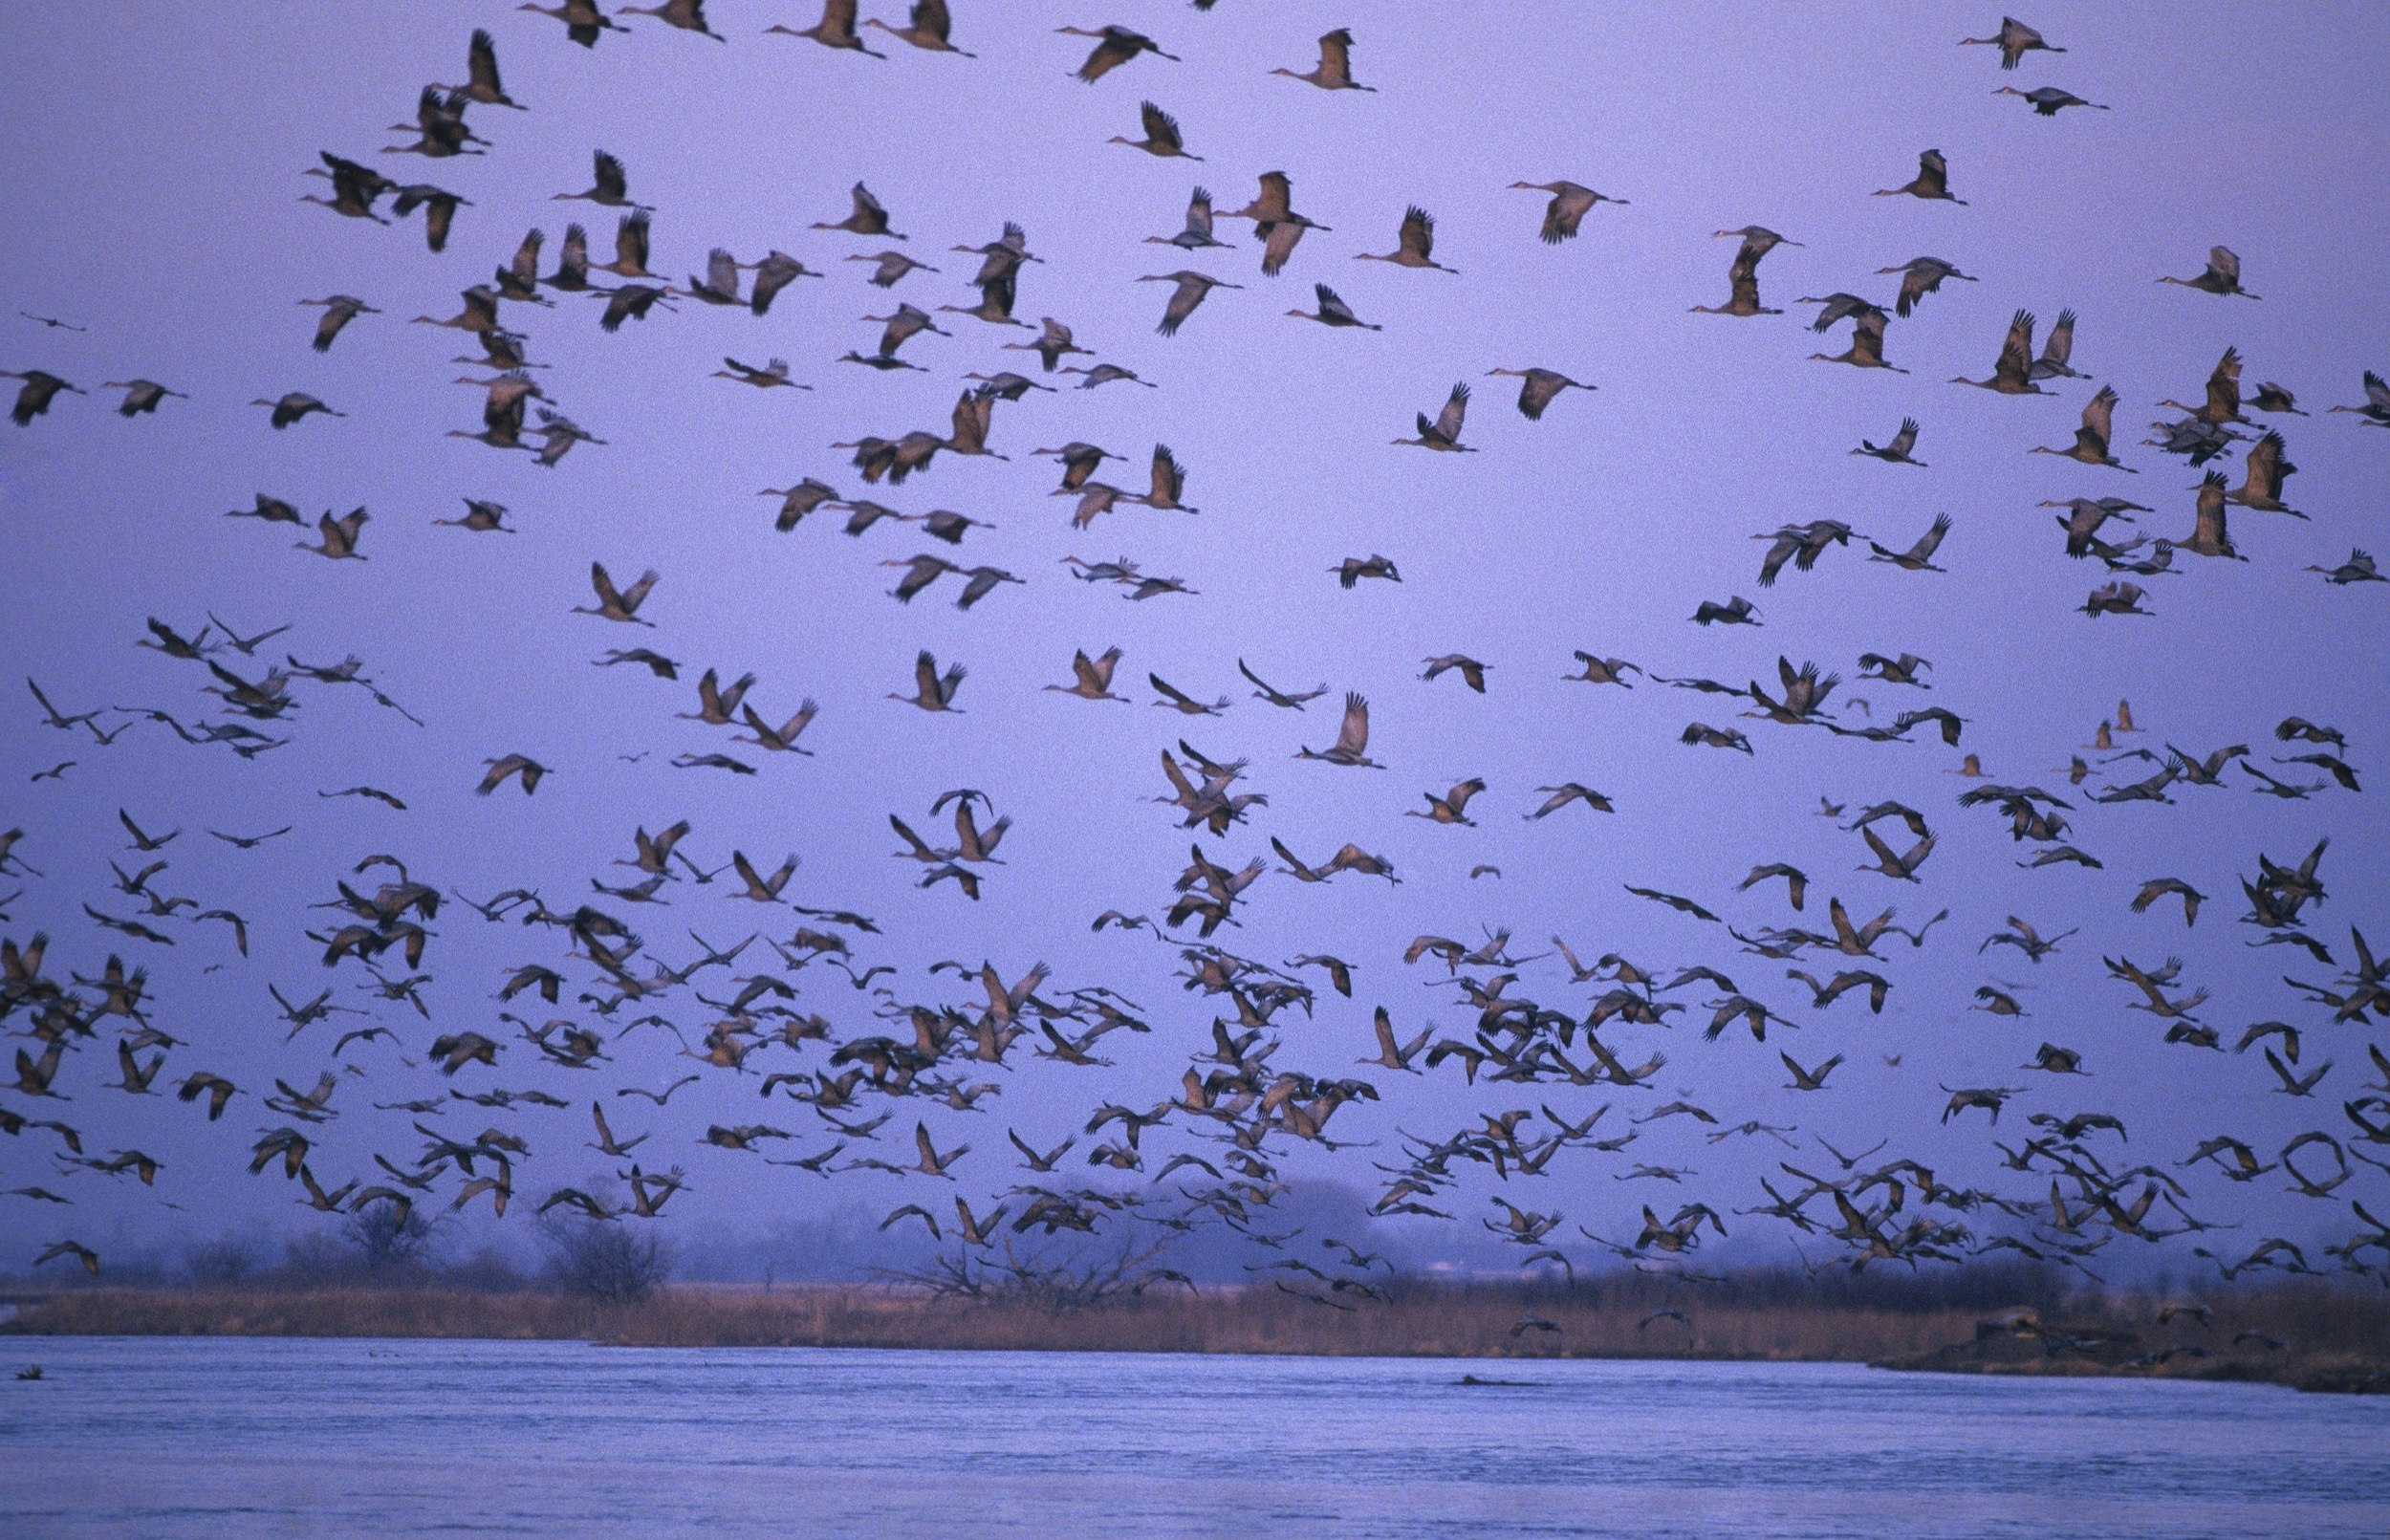 A large flock of sandhill cranes rises from a lake in Nebraska